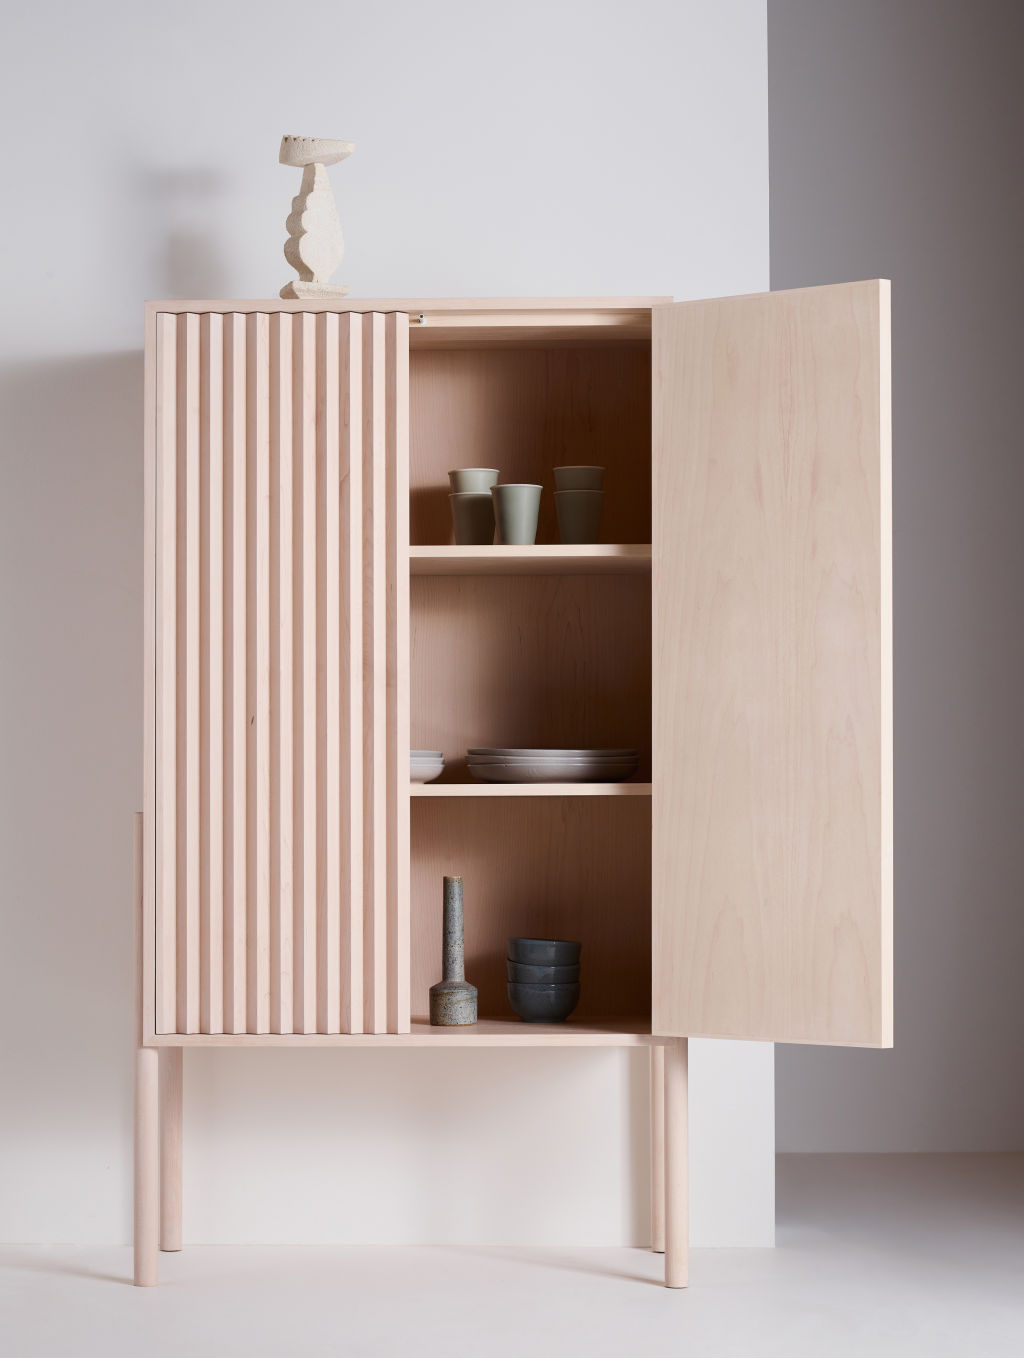 J5 Cabinet by James Howe. Photo: Supplied